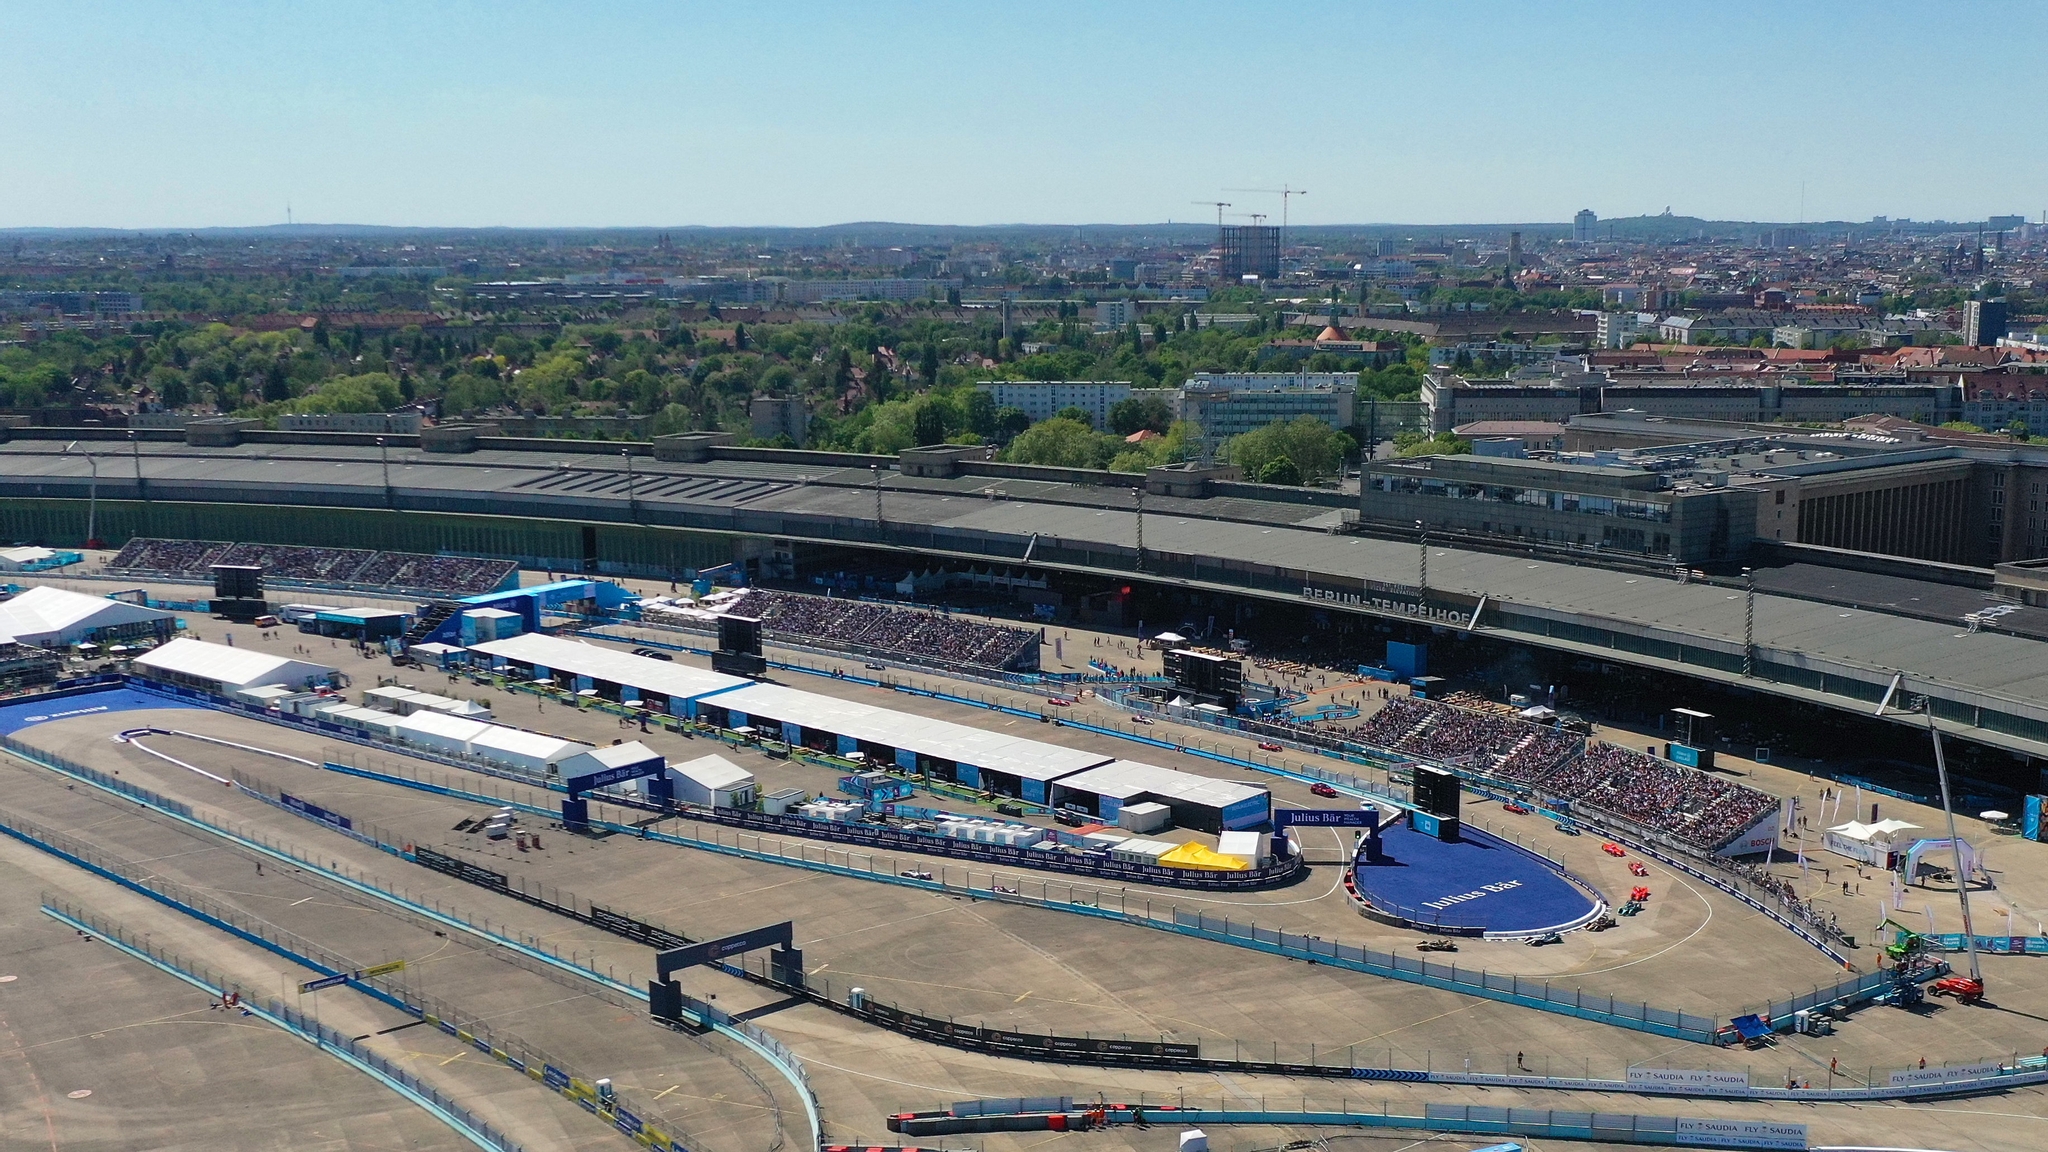 Aerial view of the start of the Formula E race in Berlin. (Copyright: Sam Bagnall)